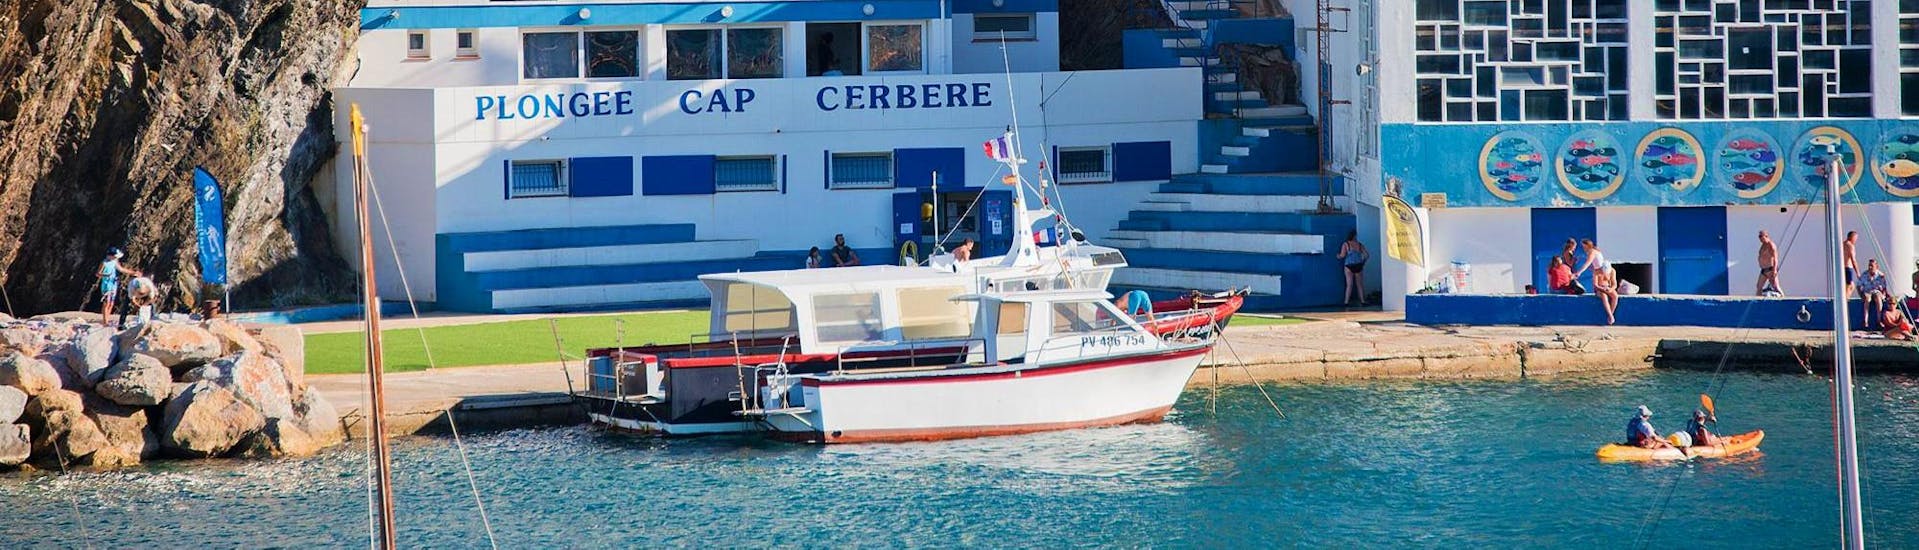 The boat of Plongée Cap Cerbère takes tourists to go to the Snorkeling activity in the marine reserve of Cerbère-Banyuls.